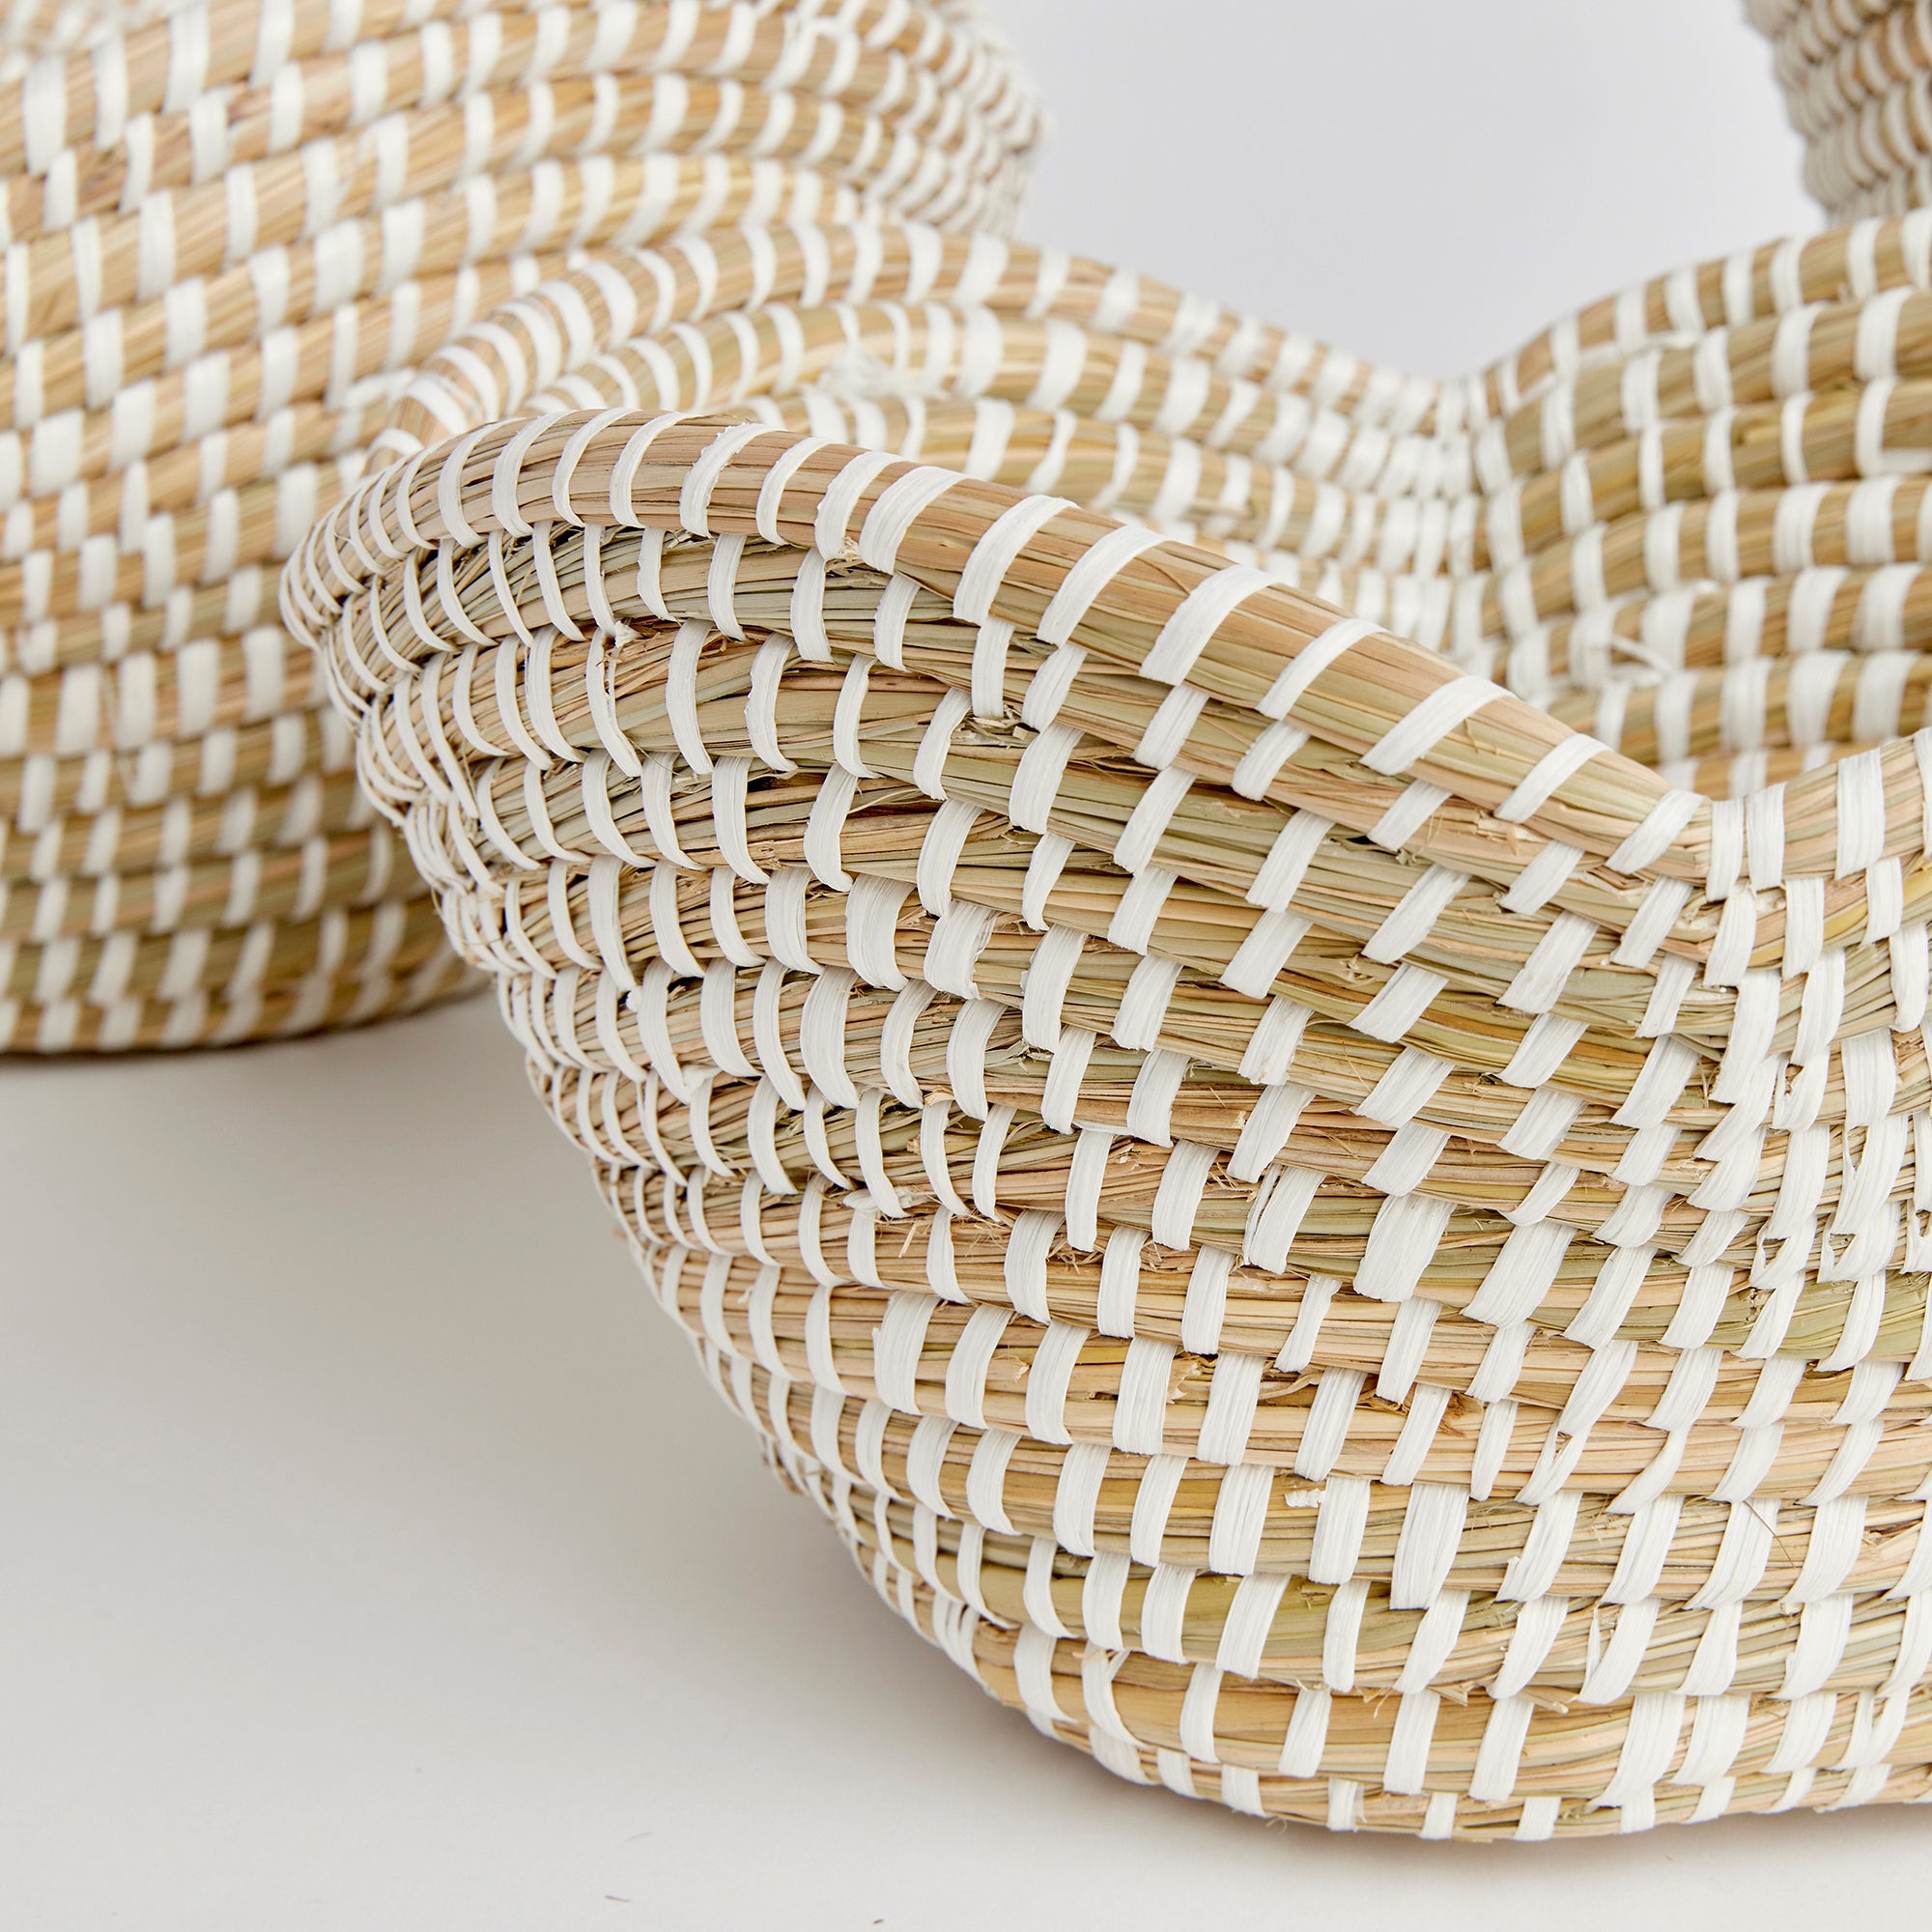 These well-scaled all natural baskets are hand-woven by skilled artisans using sustainable materials. With sculpted petal-like rims, they are just perfect for creating that spa-inspired look for home or office. Amethyst Home provides interior design, new construction, custom furniture, and area rugs in the Boston metro area.